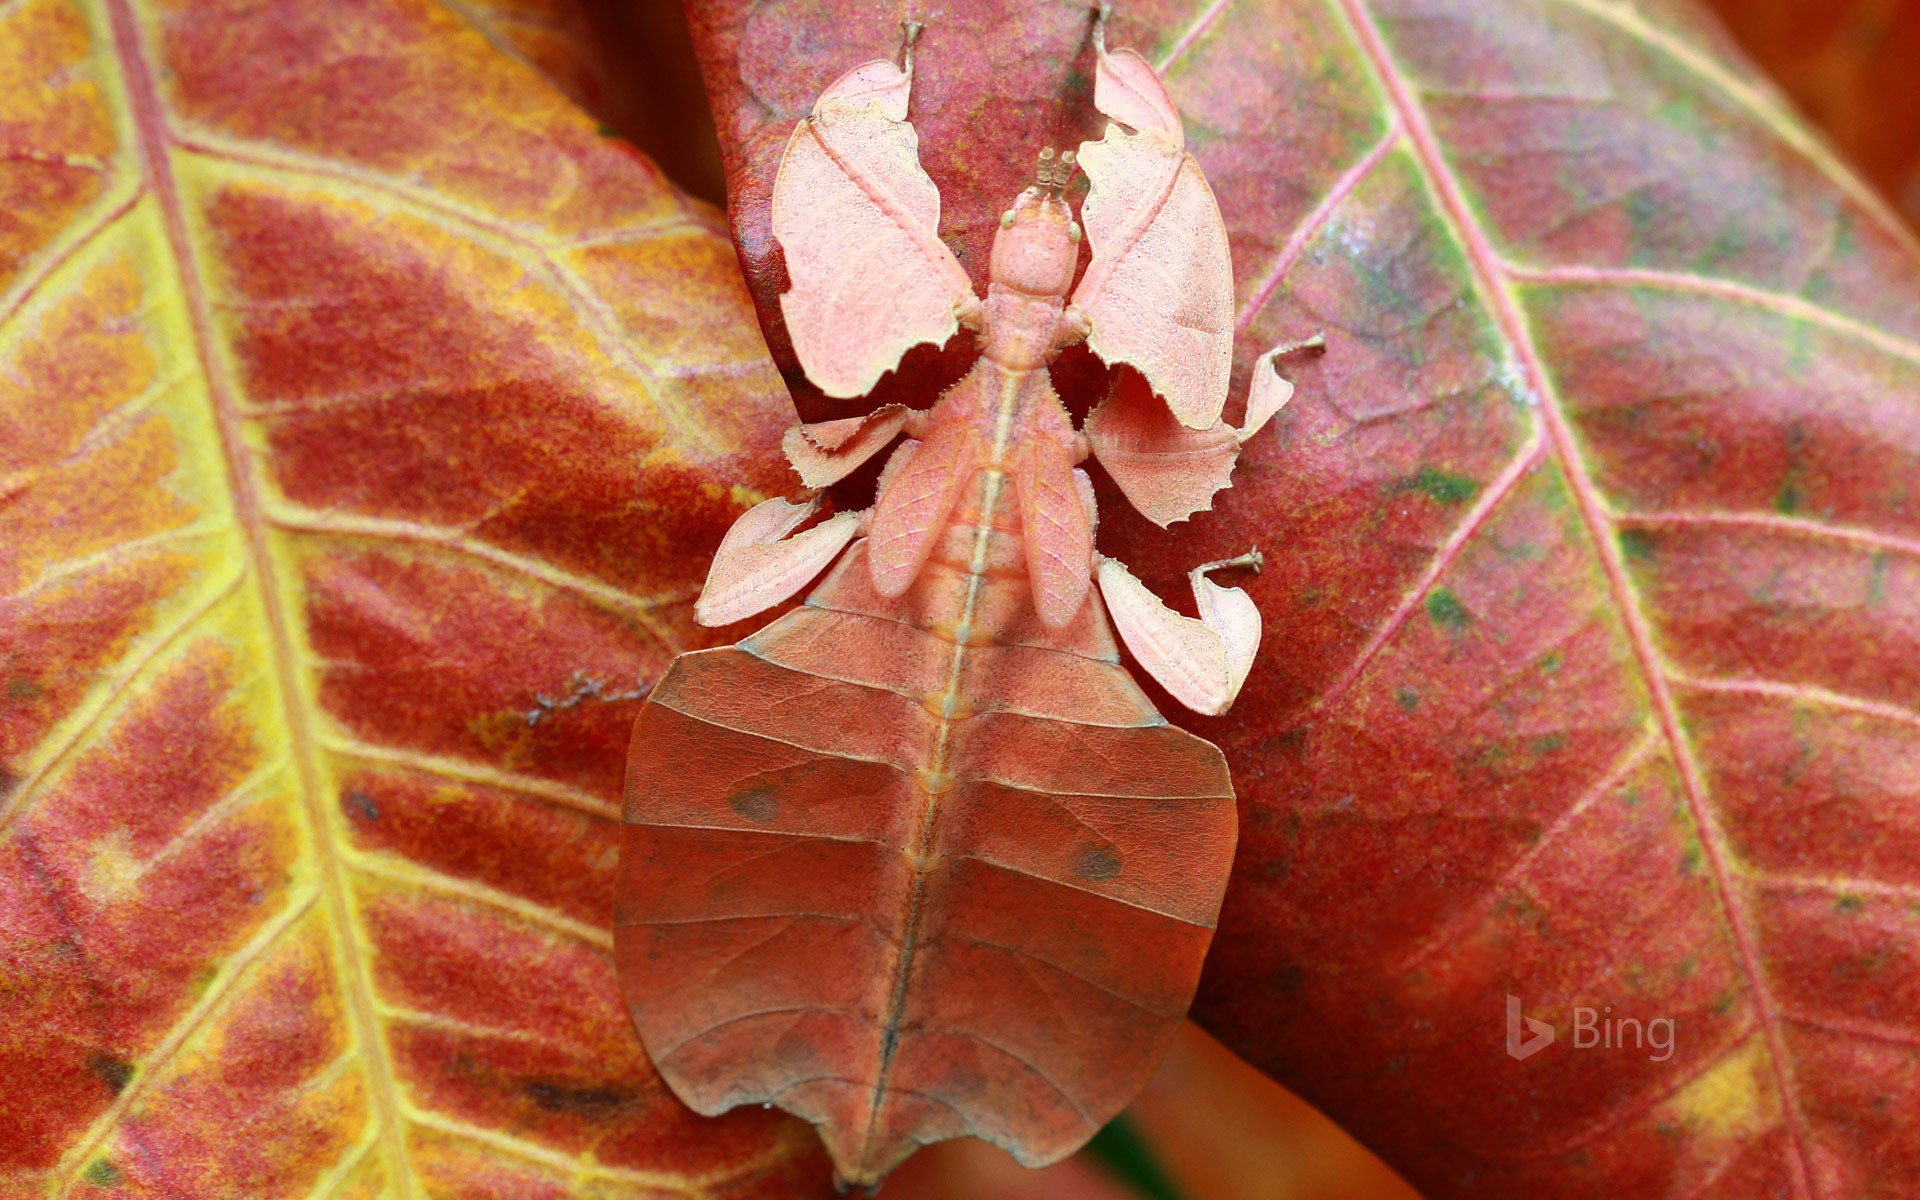 Leaf insect, Indonesia